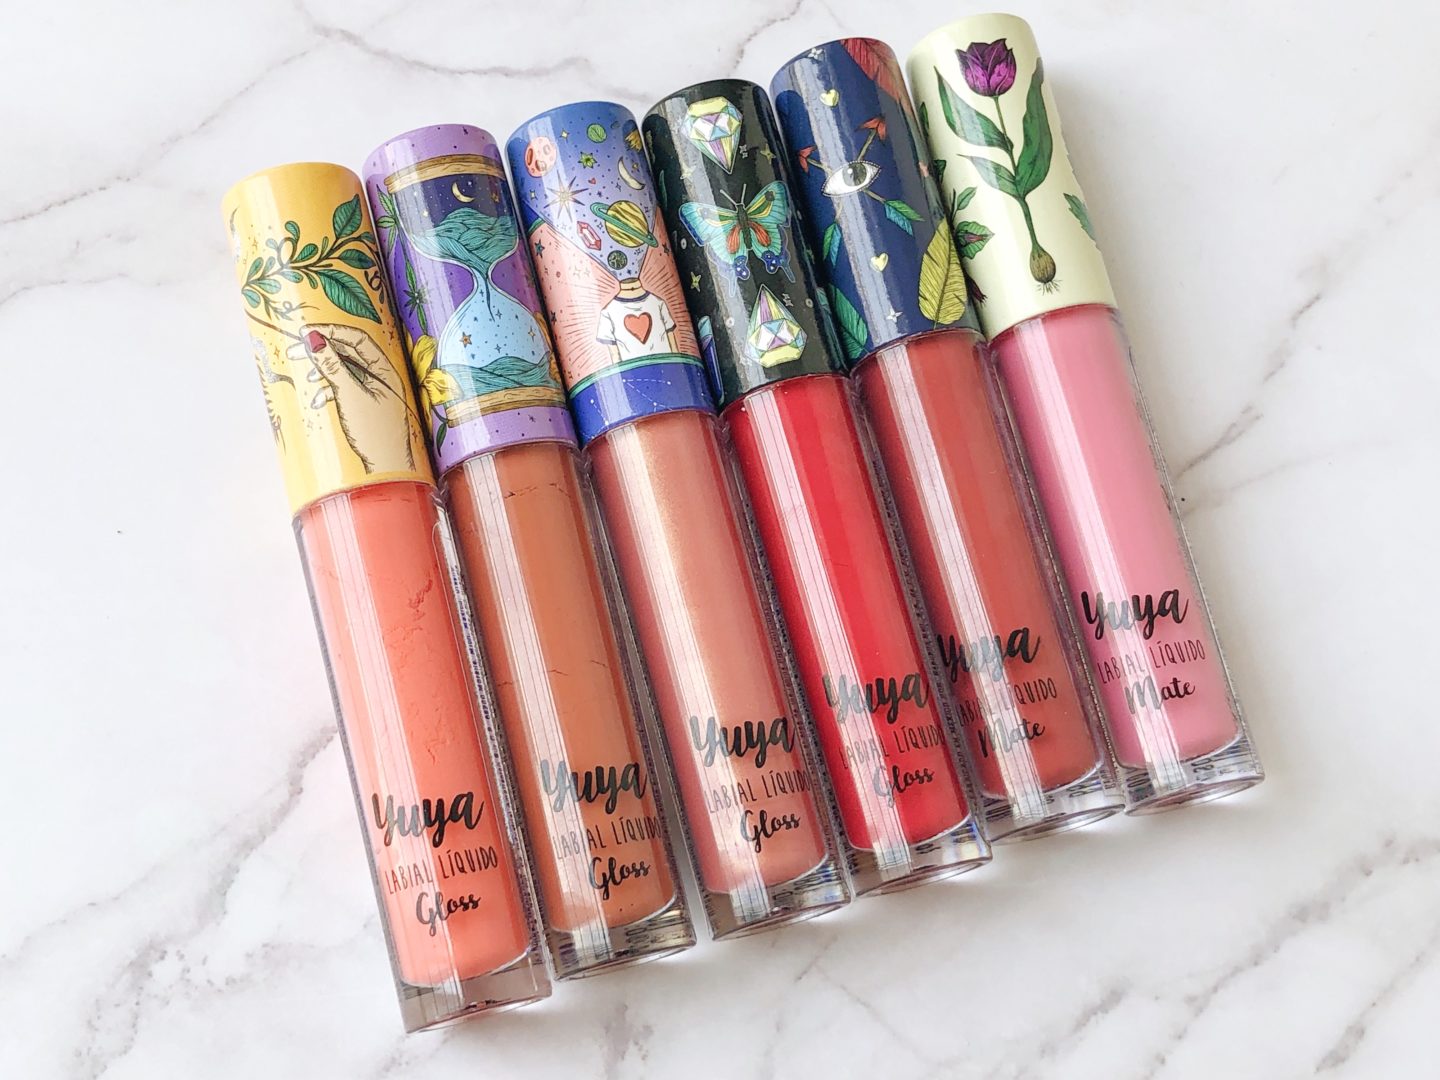 Yuya Labiales Glosses: Review + Swatches